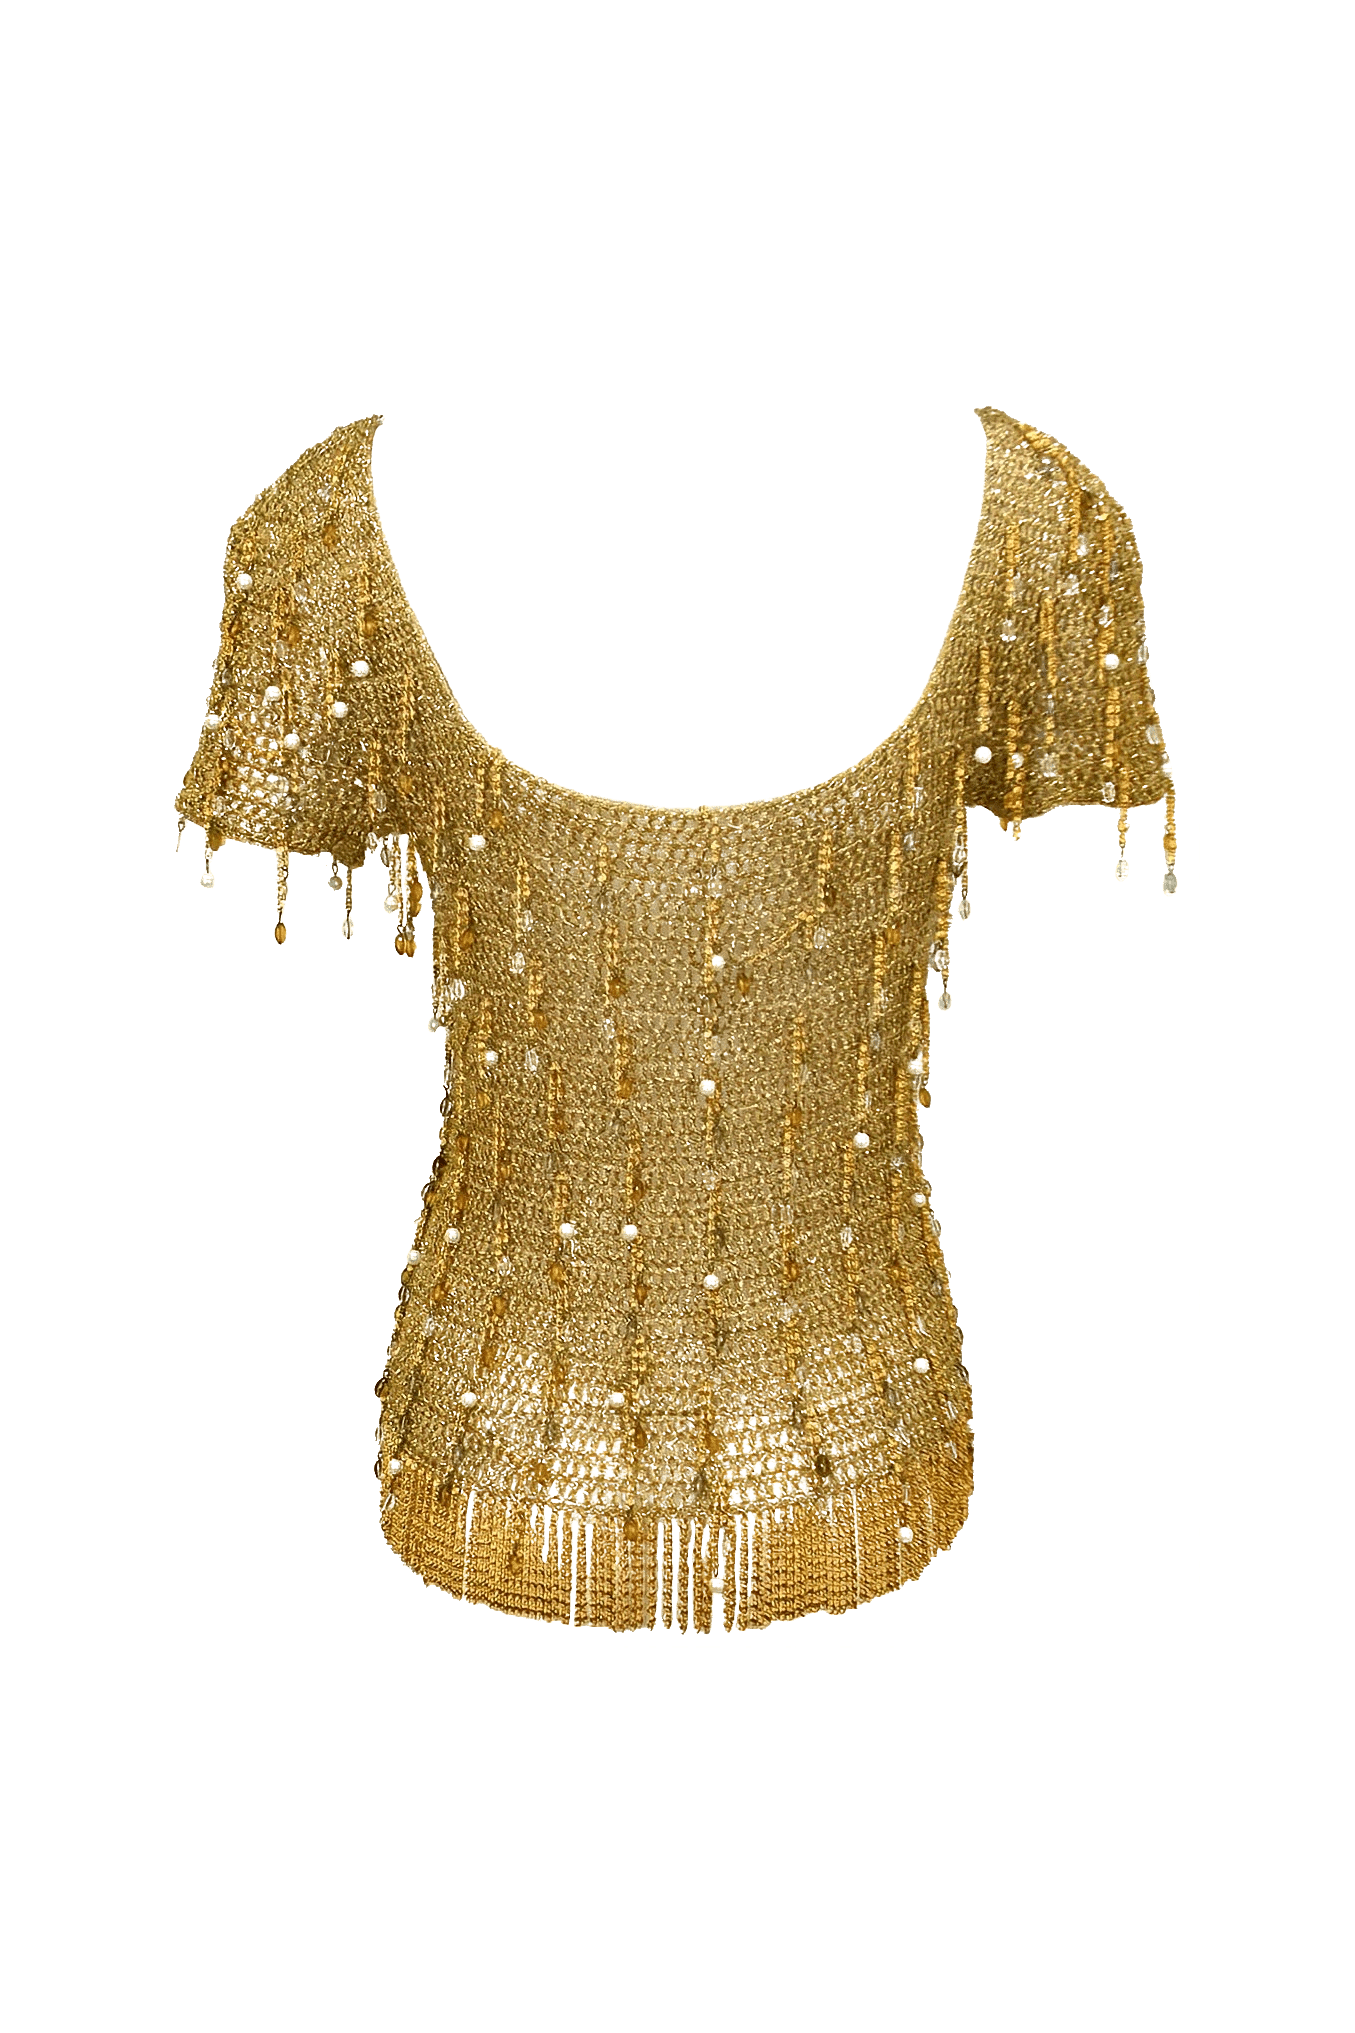 Lorris Azzaro Vintage 1970s Gold Crochet and Chain Top Sz Small - Foxy Couture Carmel